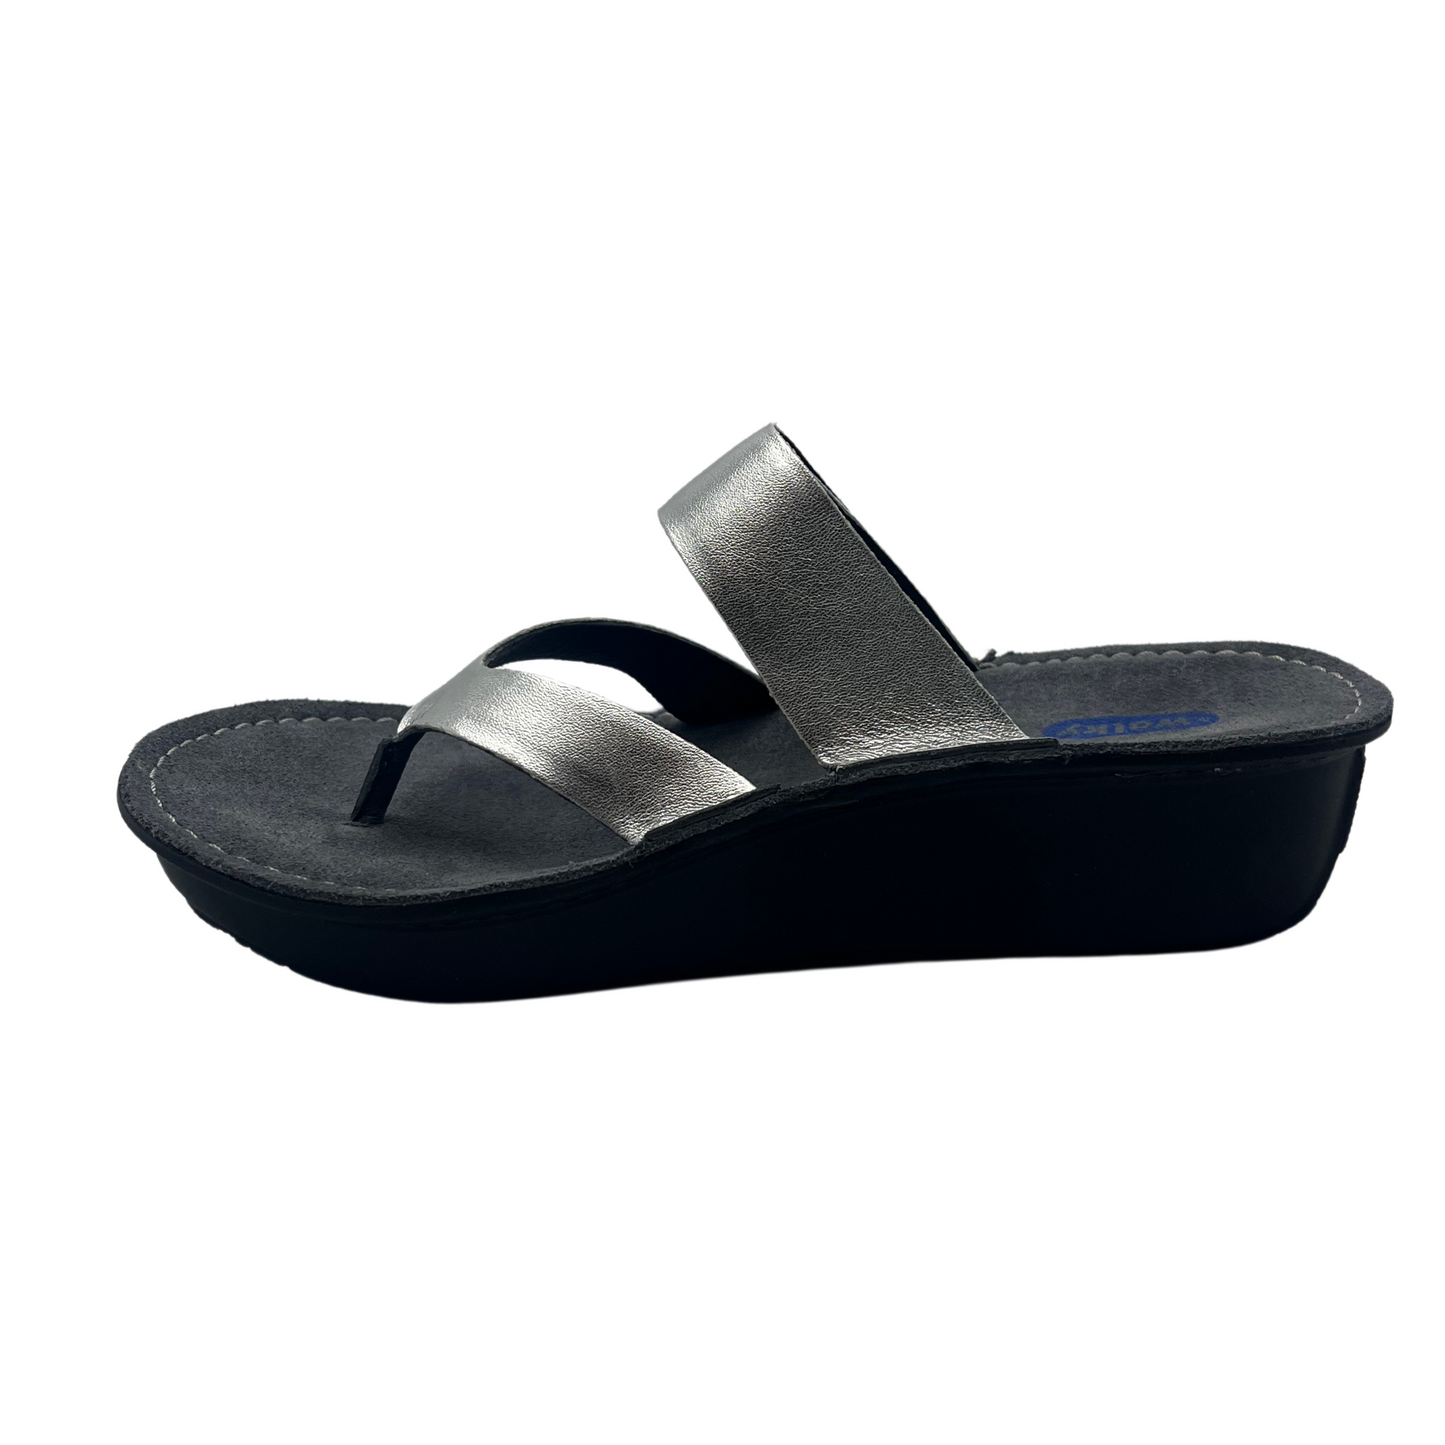 Left facing view of a metallic silver sandal with a wedge heel and an adjustable strap